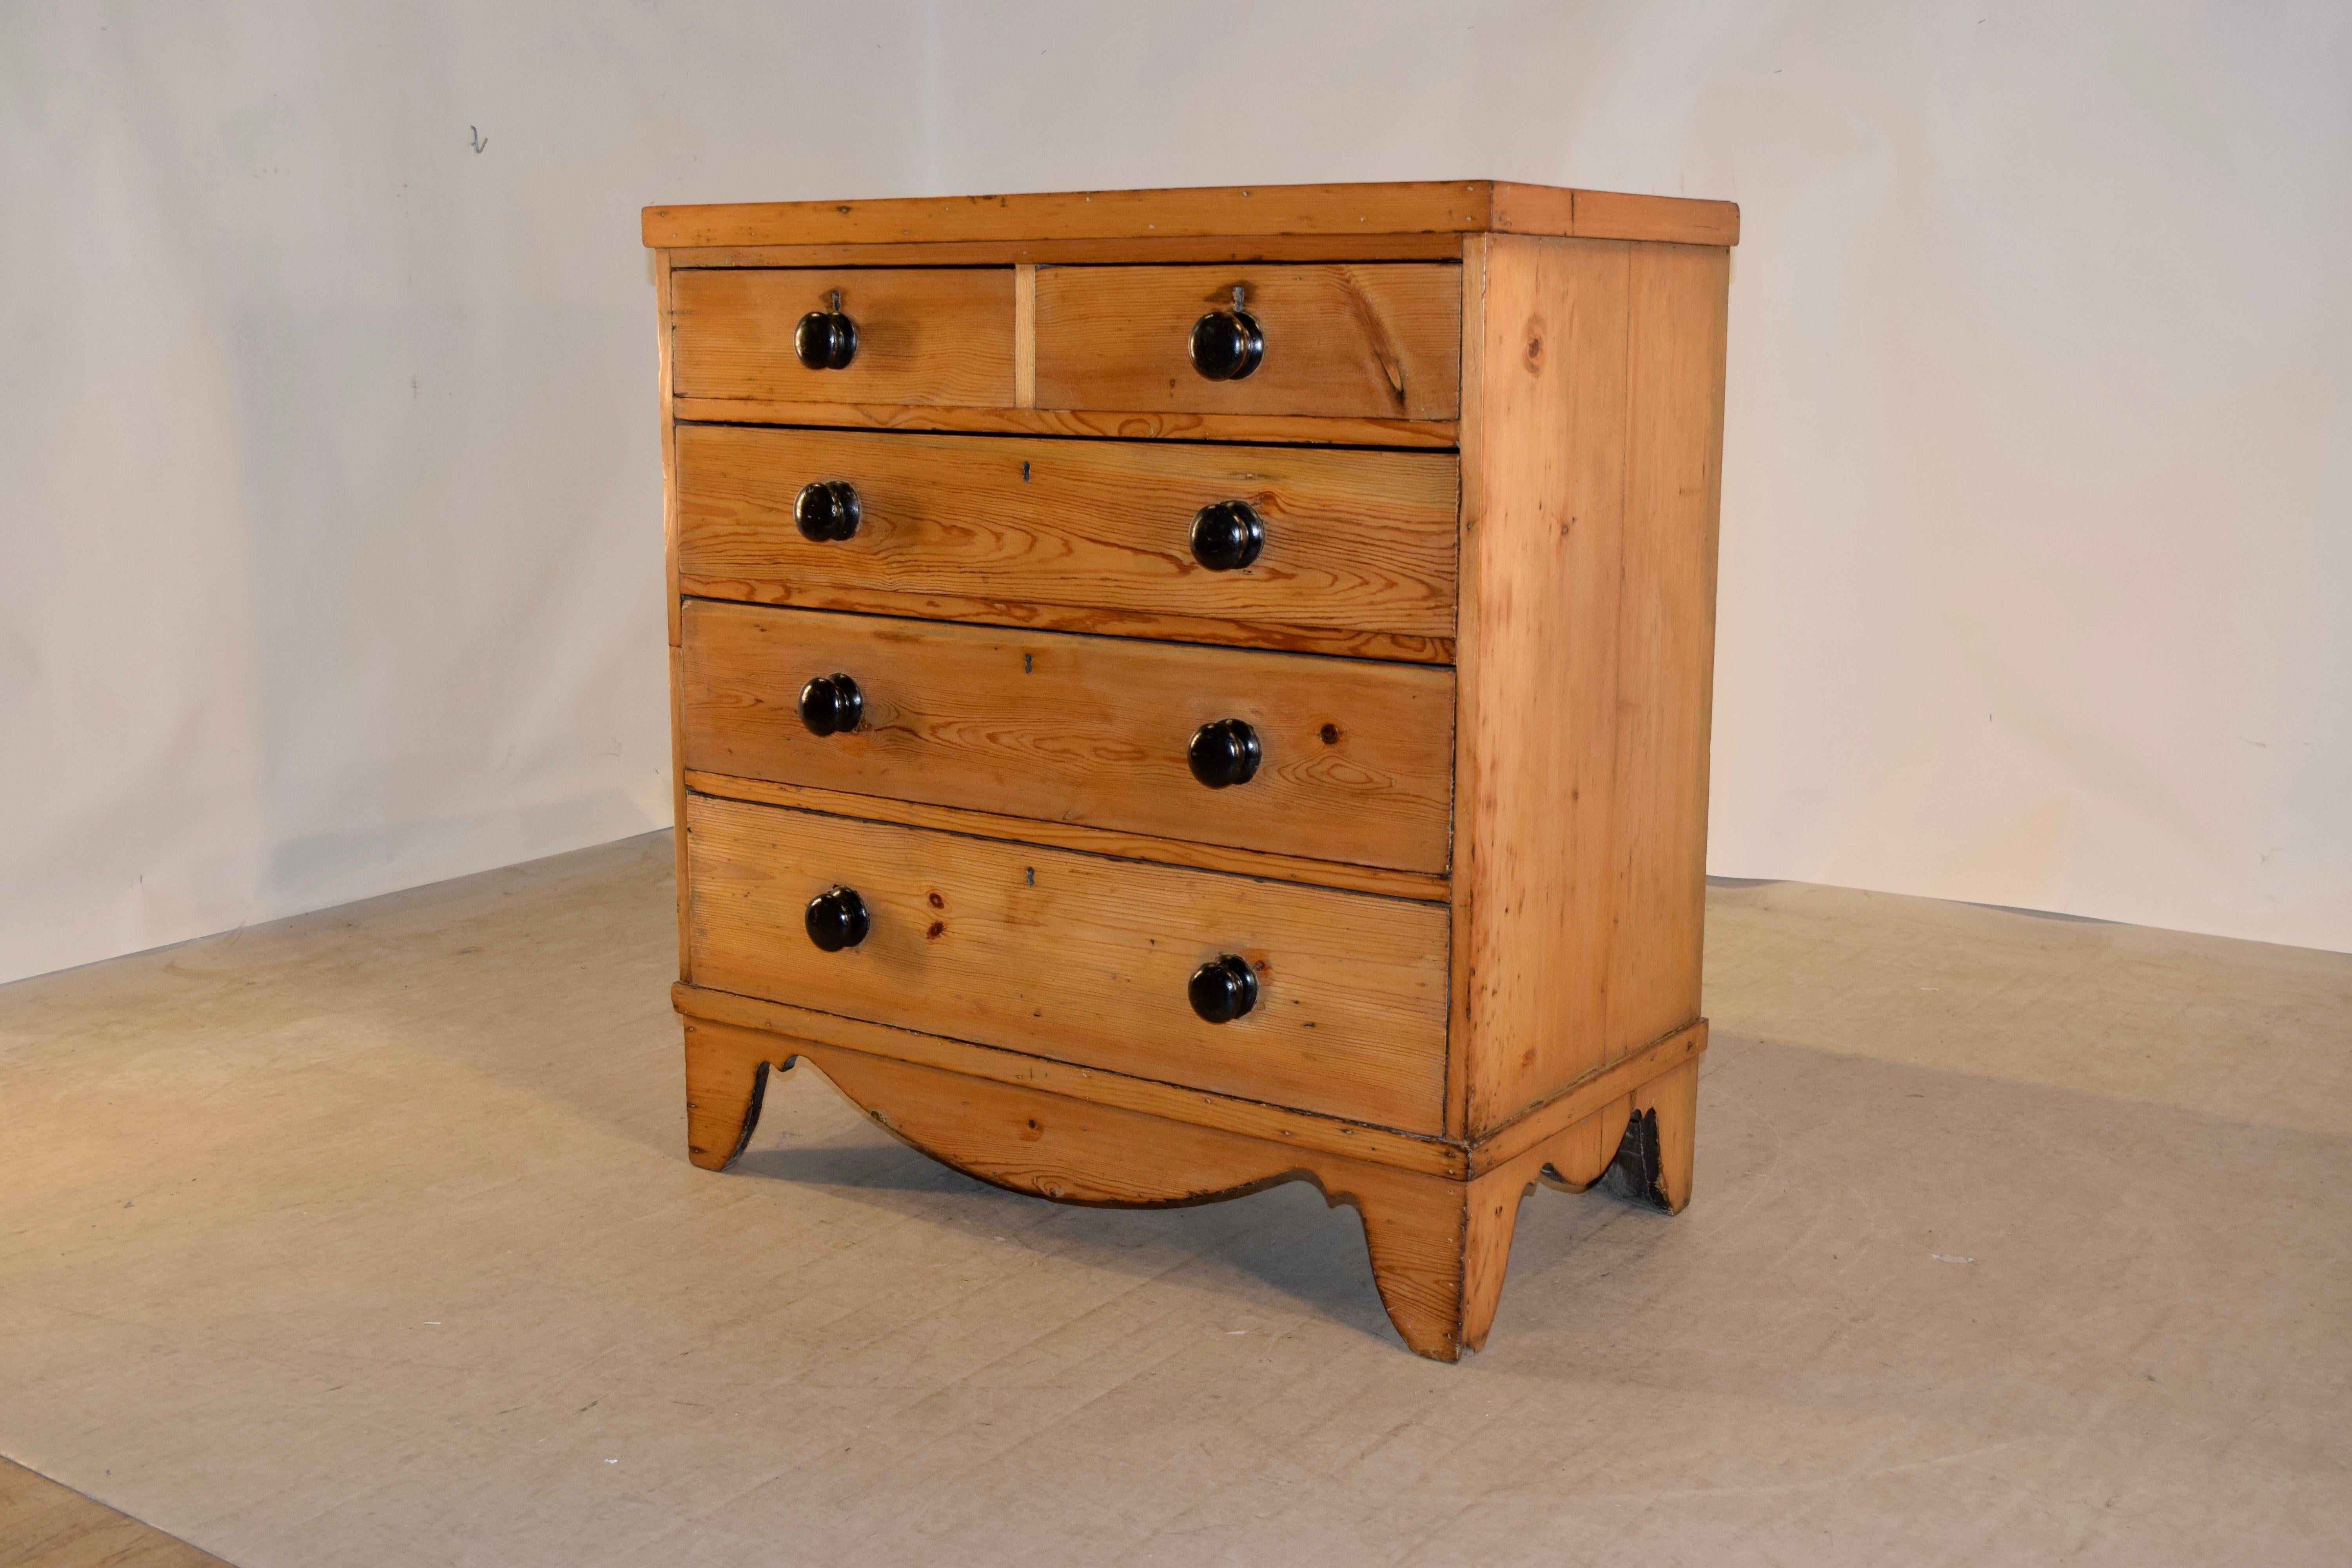 19th century pine chest from England. The top has a banded edge and follows down to simple sides and two over three drawers in the front. The case is elegant and simple and has old repairs. Raised on hand scalloped bracket feet.